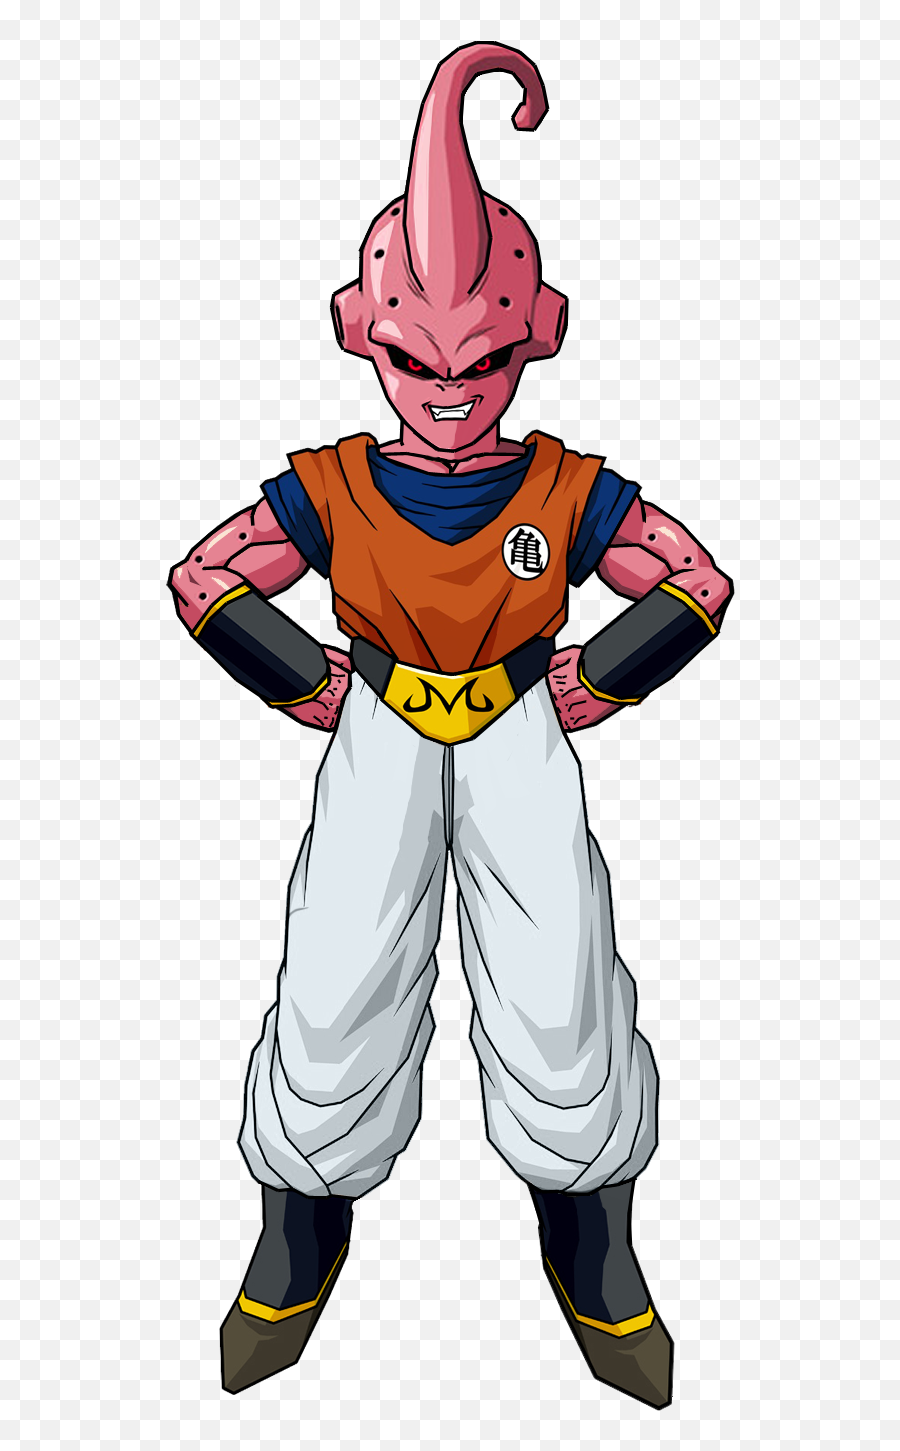 Free Download Dragon Ball Z Wallpapers Super Buu Krillin - Dragon Ball Z Krillin Png,Krillin Png